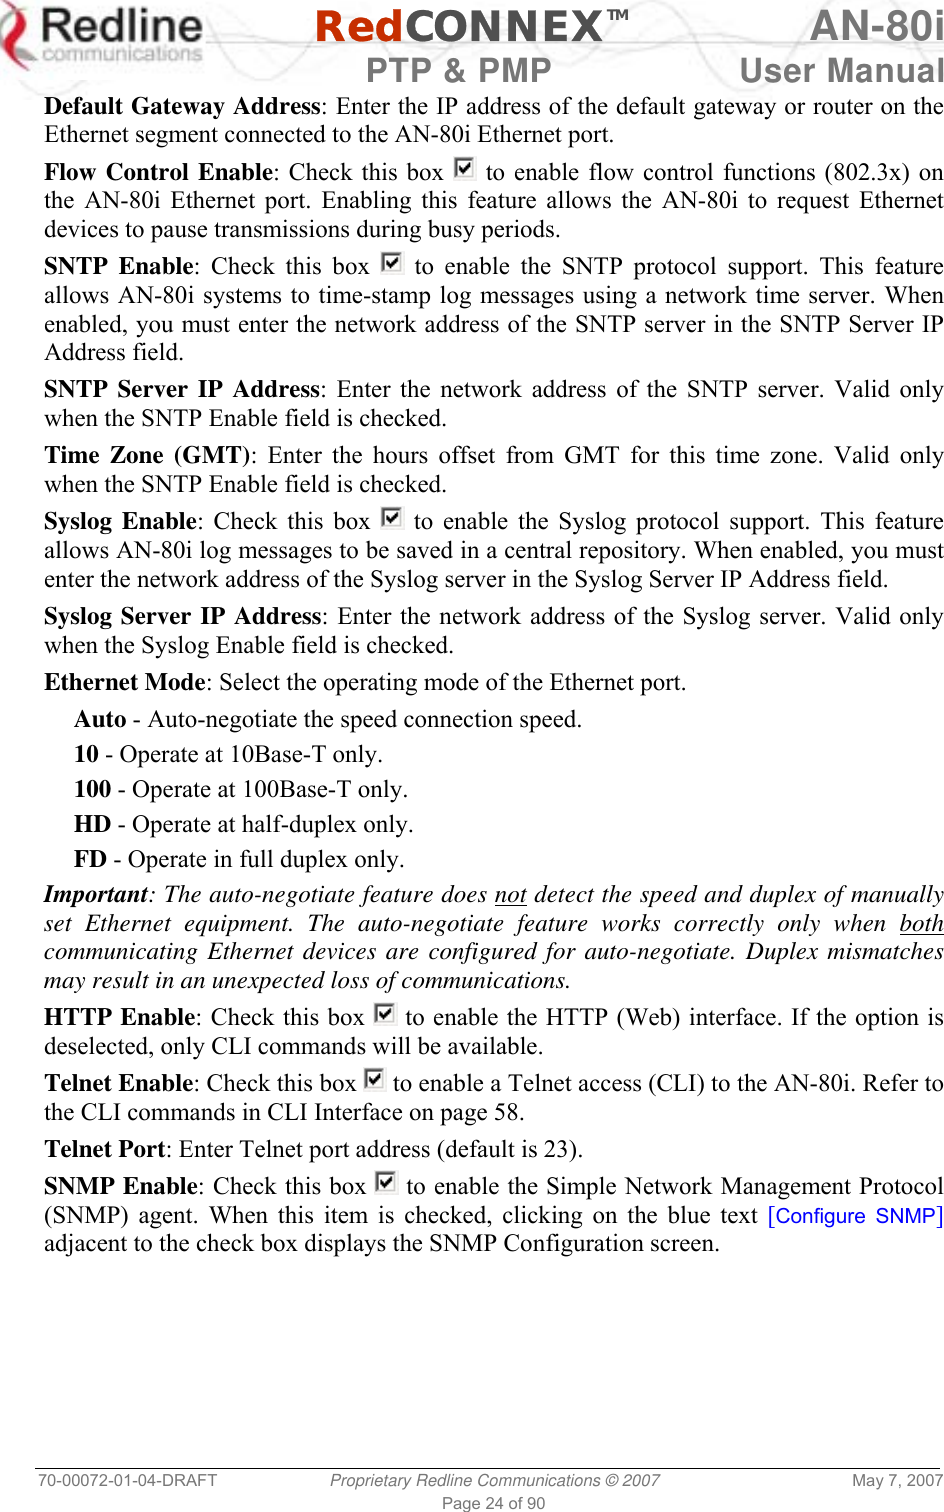   RedCONNEXTM AN-80i   PTP &amp; PMP  User Manual 70-00072-01-04-DRAFT  Proprietary Redline Communications © 2007  May 7, 2007 Page 24 of 90 Default Gateway Address: Enter the IP address of the default gateway or router on the Ethernet segment connected to the AN-80i Ethernet port. Flow Control Enable: Check this box   to enable flow control functions (802.3x) on the AN-80i Ethernet port. Enabling this feature allows the AN-80i to request Ethernet devices to pause transmissions during busy periods. SNTP Enable: Check this box   to enable the SNTP protocol support. This feature allows AN-80i systems to time-stamp log messages using a network time server. When enabled, you must enter the network address of the SNTP server in the SNTP Server IP Address field.  SNTP Server IP Address: Enter the network address of the SNTP server. Valid only when the SNTP Enable field is checked. Time Zone (GMT): Enter the hours offset from GMT for this time zone. Valid only when the SNTP Enable field is checked. Syslog Enable: Check this box   to enable the Syslog protocol support. This feature allows AN-80i log messages to be saved in a central repository. When enabled, you must enter the network address of the Syslog server in the Syslog Server IP Address field. Syslog Server IP Address: Enter the network address of the Syslog server. Valid only when the Syslog Enable field is checked. Ethernet Mode: Select the operating mode of the Ethernet port. Auto - Auto-negotiate the speed connection speed. 10 - Operate at 10Base-T only. 100 - Operate at 100Base-T only. HD - Operate at half-duplex only. FD - Operate in full duplex only. Important: The auto-negotiate feature does not detect the speed and duplex of manually set Ethernet equipment. The auto-negotiate feature works correctly only when both communicating Ethernet devices are configured for auto-negotiate. Duplex mismatches may result in an unexpected loss of communications. HTTP Enable: Check this box   to enable the HTTP (Web) interface. If the option is deselected, only CLI commands will be available. Telnet Enable: Check this box   to enable a Telnet access (CLI) to the AN-80i. Refer to the CLI commands in CLI Interface on page 58. Telnet Port: Enter Telnet port address (default is 23). SNMP Enable: Check this box   to enable the Simple Network Management Protocol (SNMP) agent. When this item is checked, clicking on the blue text [Configure SNMP] adjacent to the check box displays the SNMP Configuration screen. 